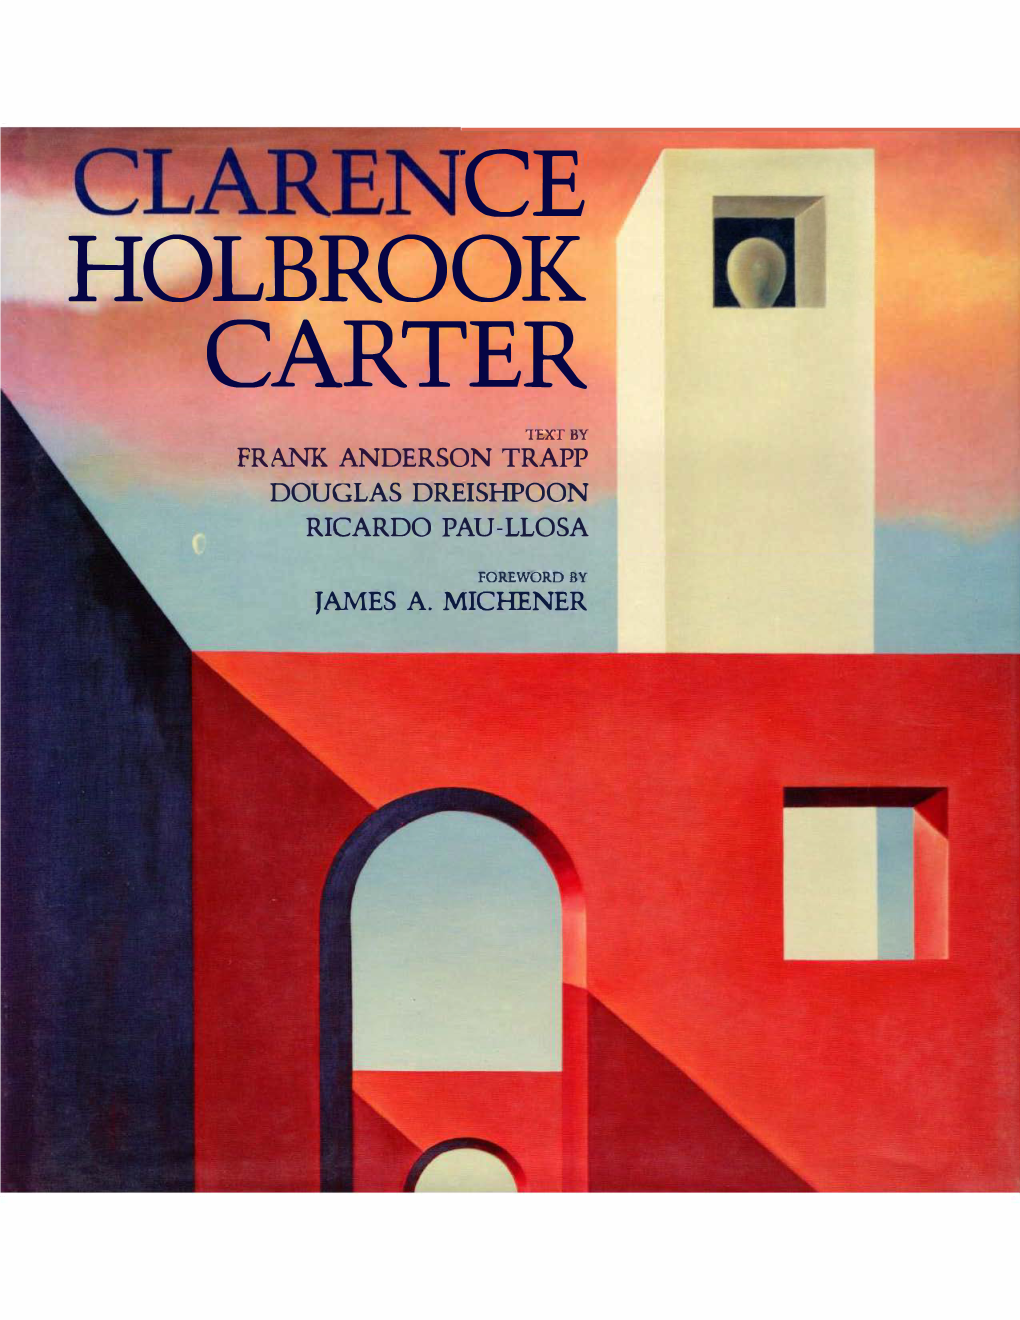 Ce Holbrook Carter Text By